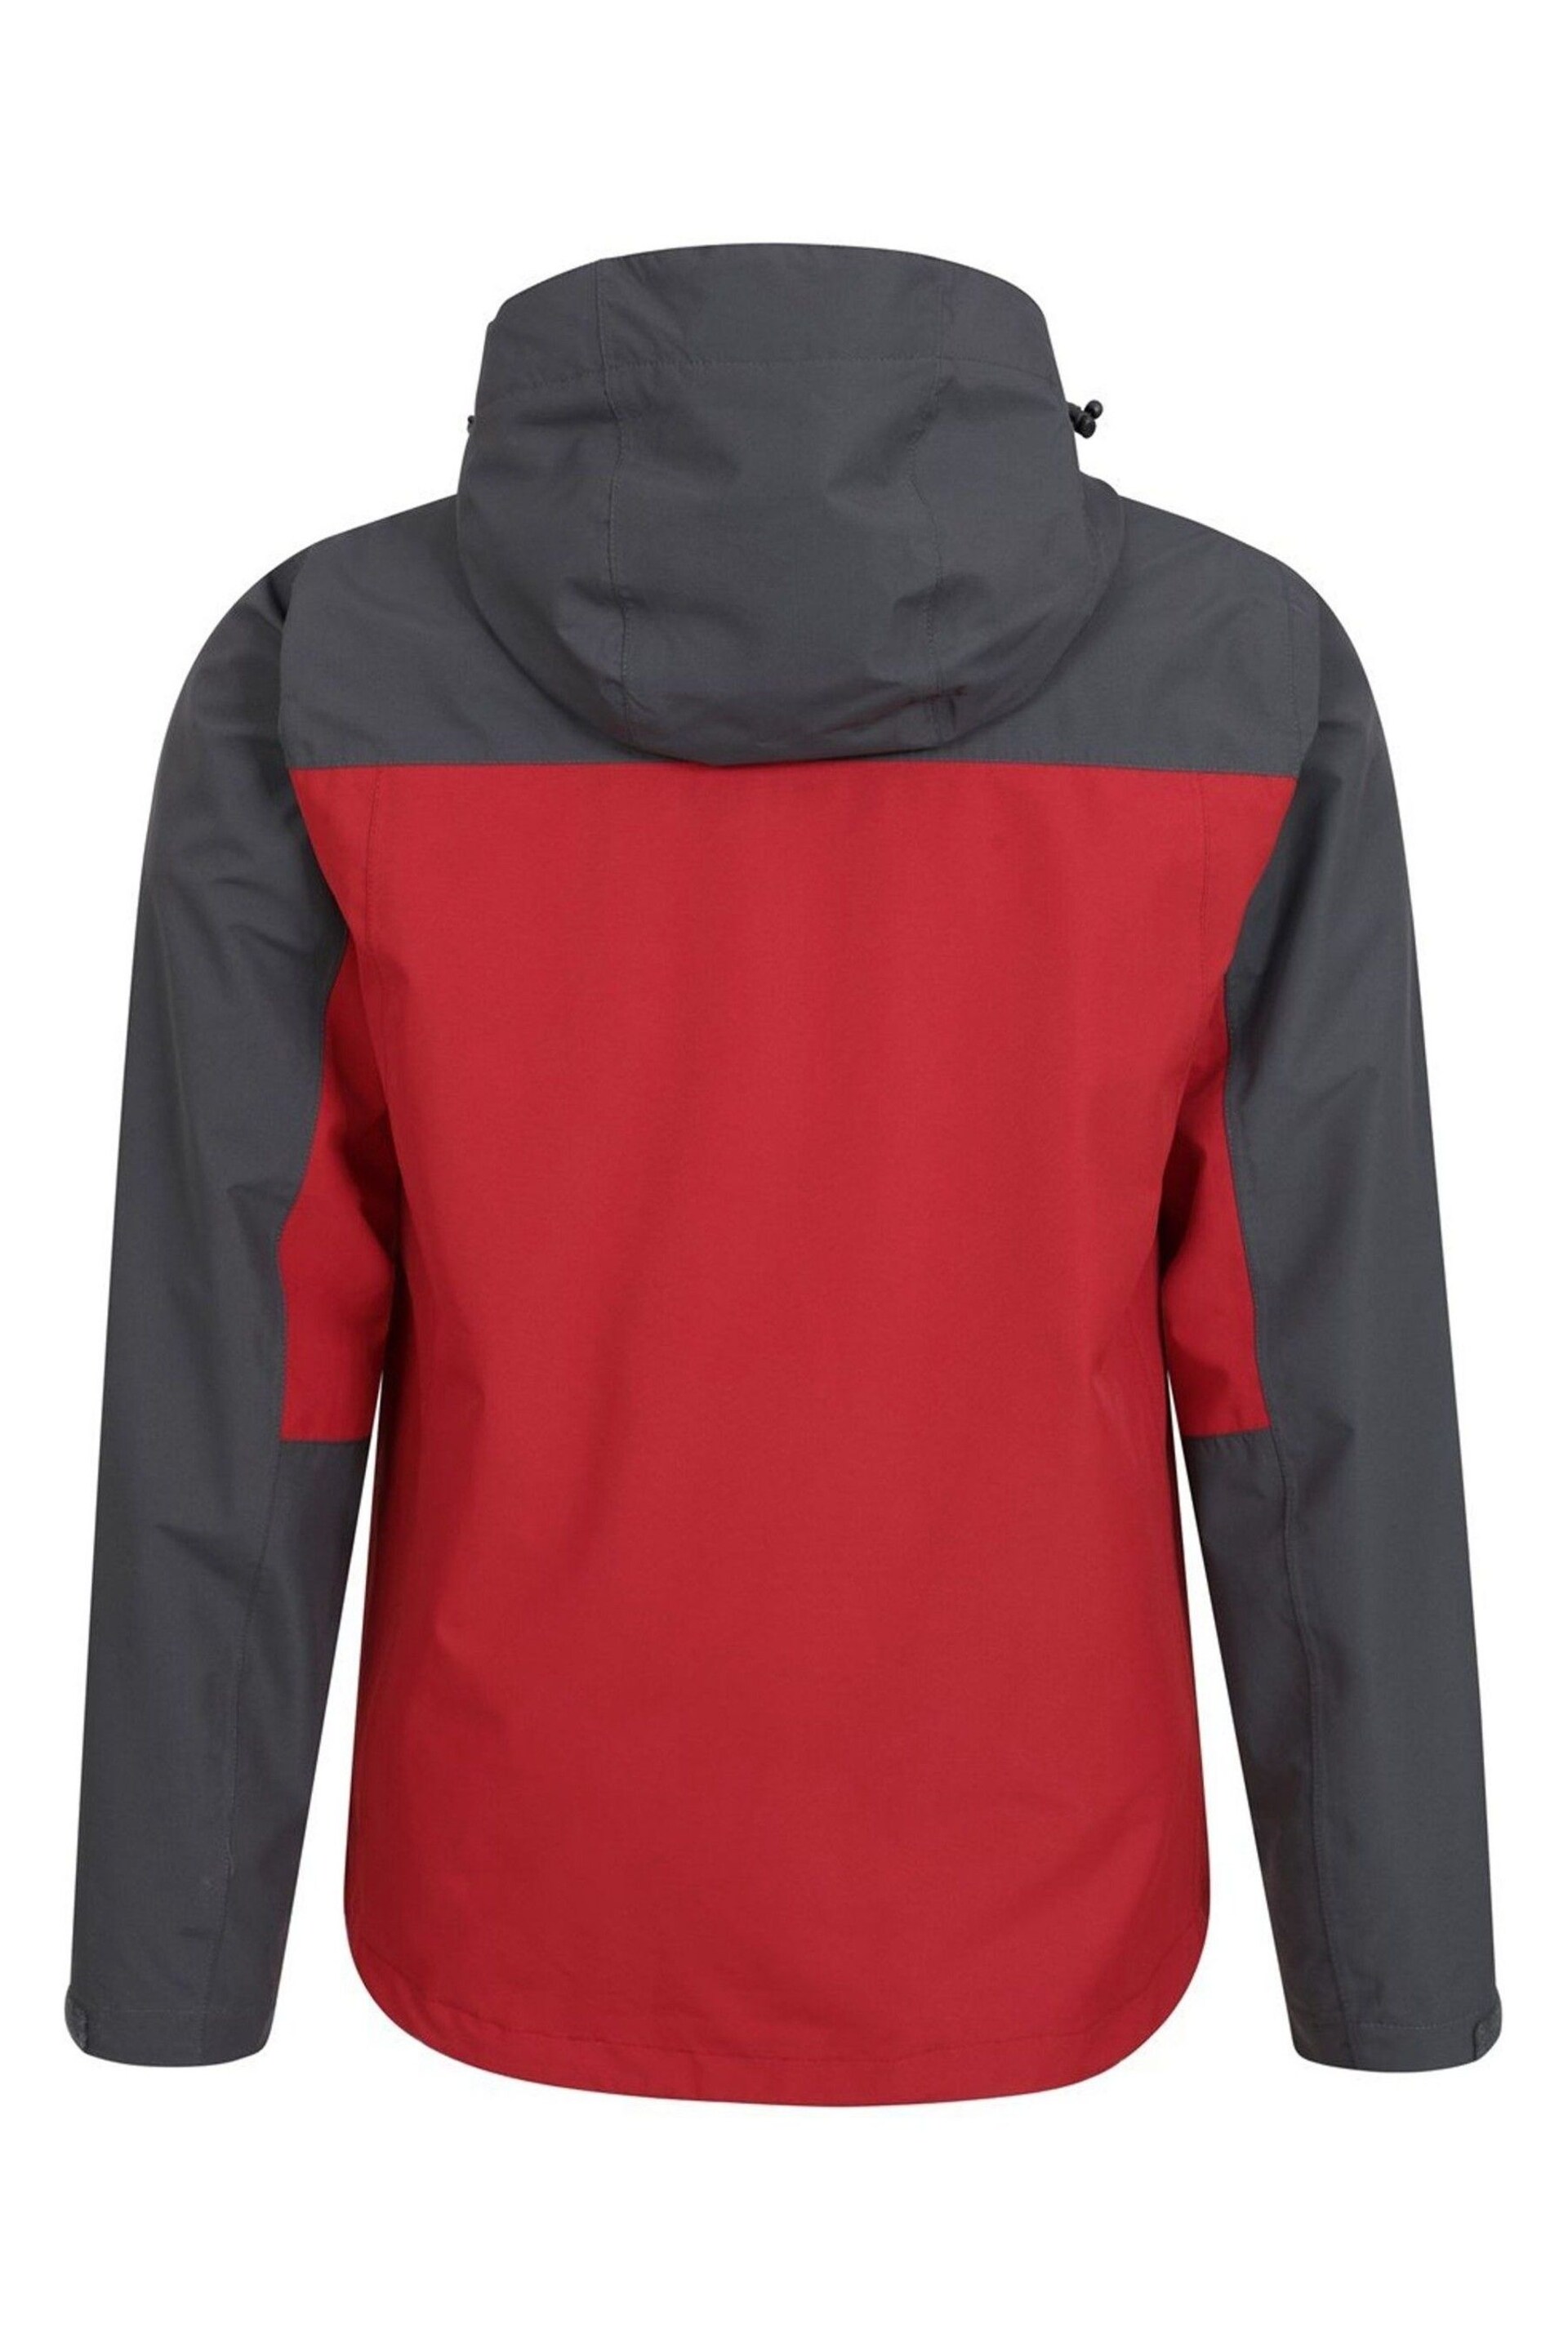 Mountain Warehouse Red Brisk Extreme Waterproof Jacket - Mens - Image 3 of 3